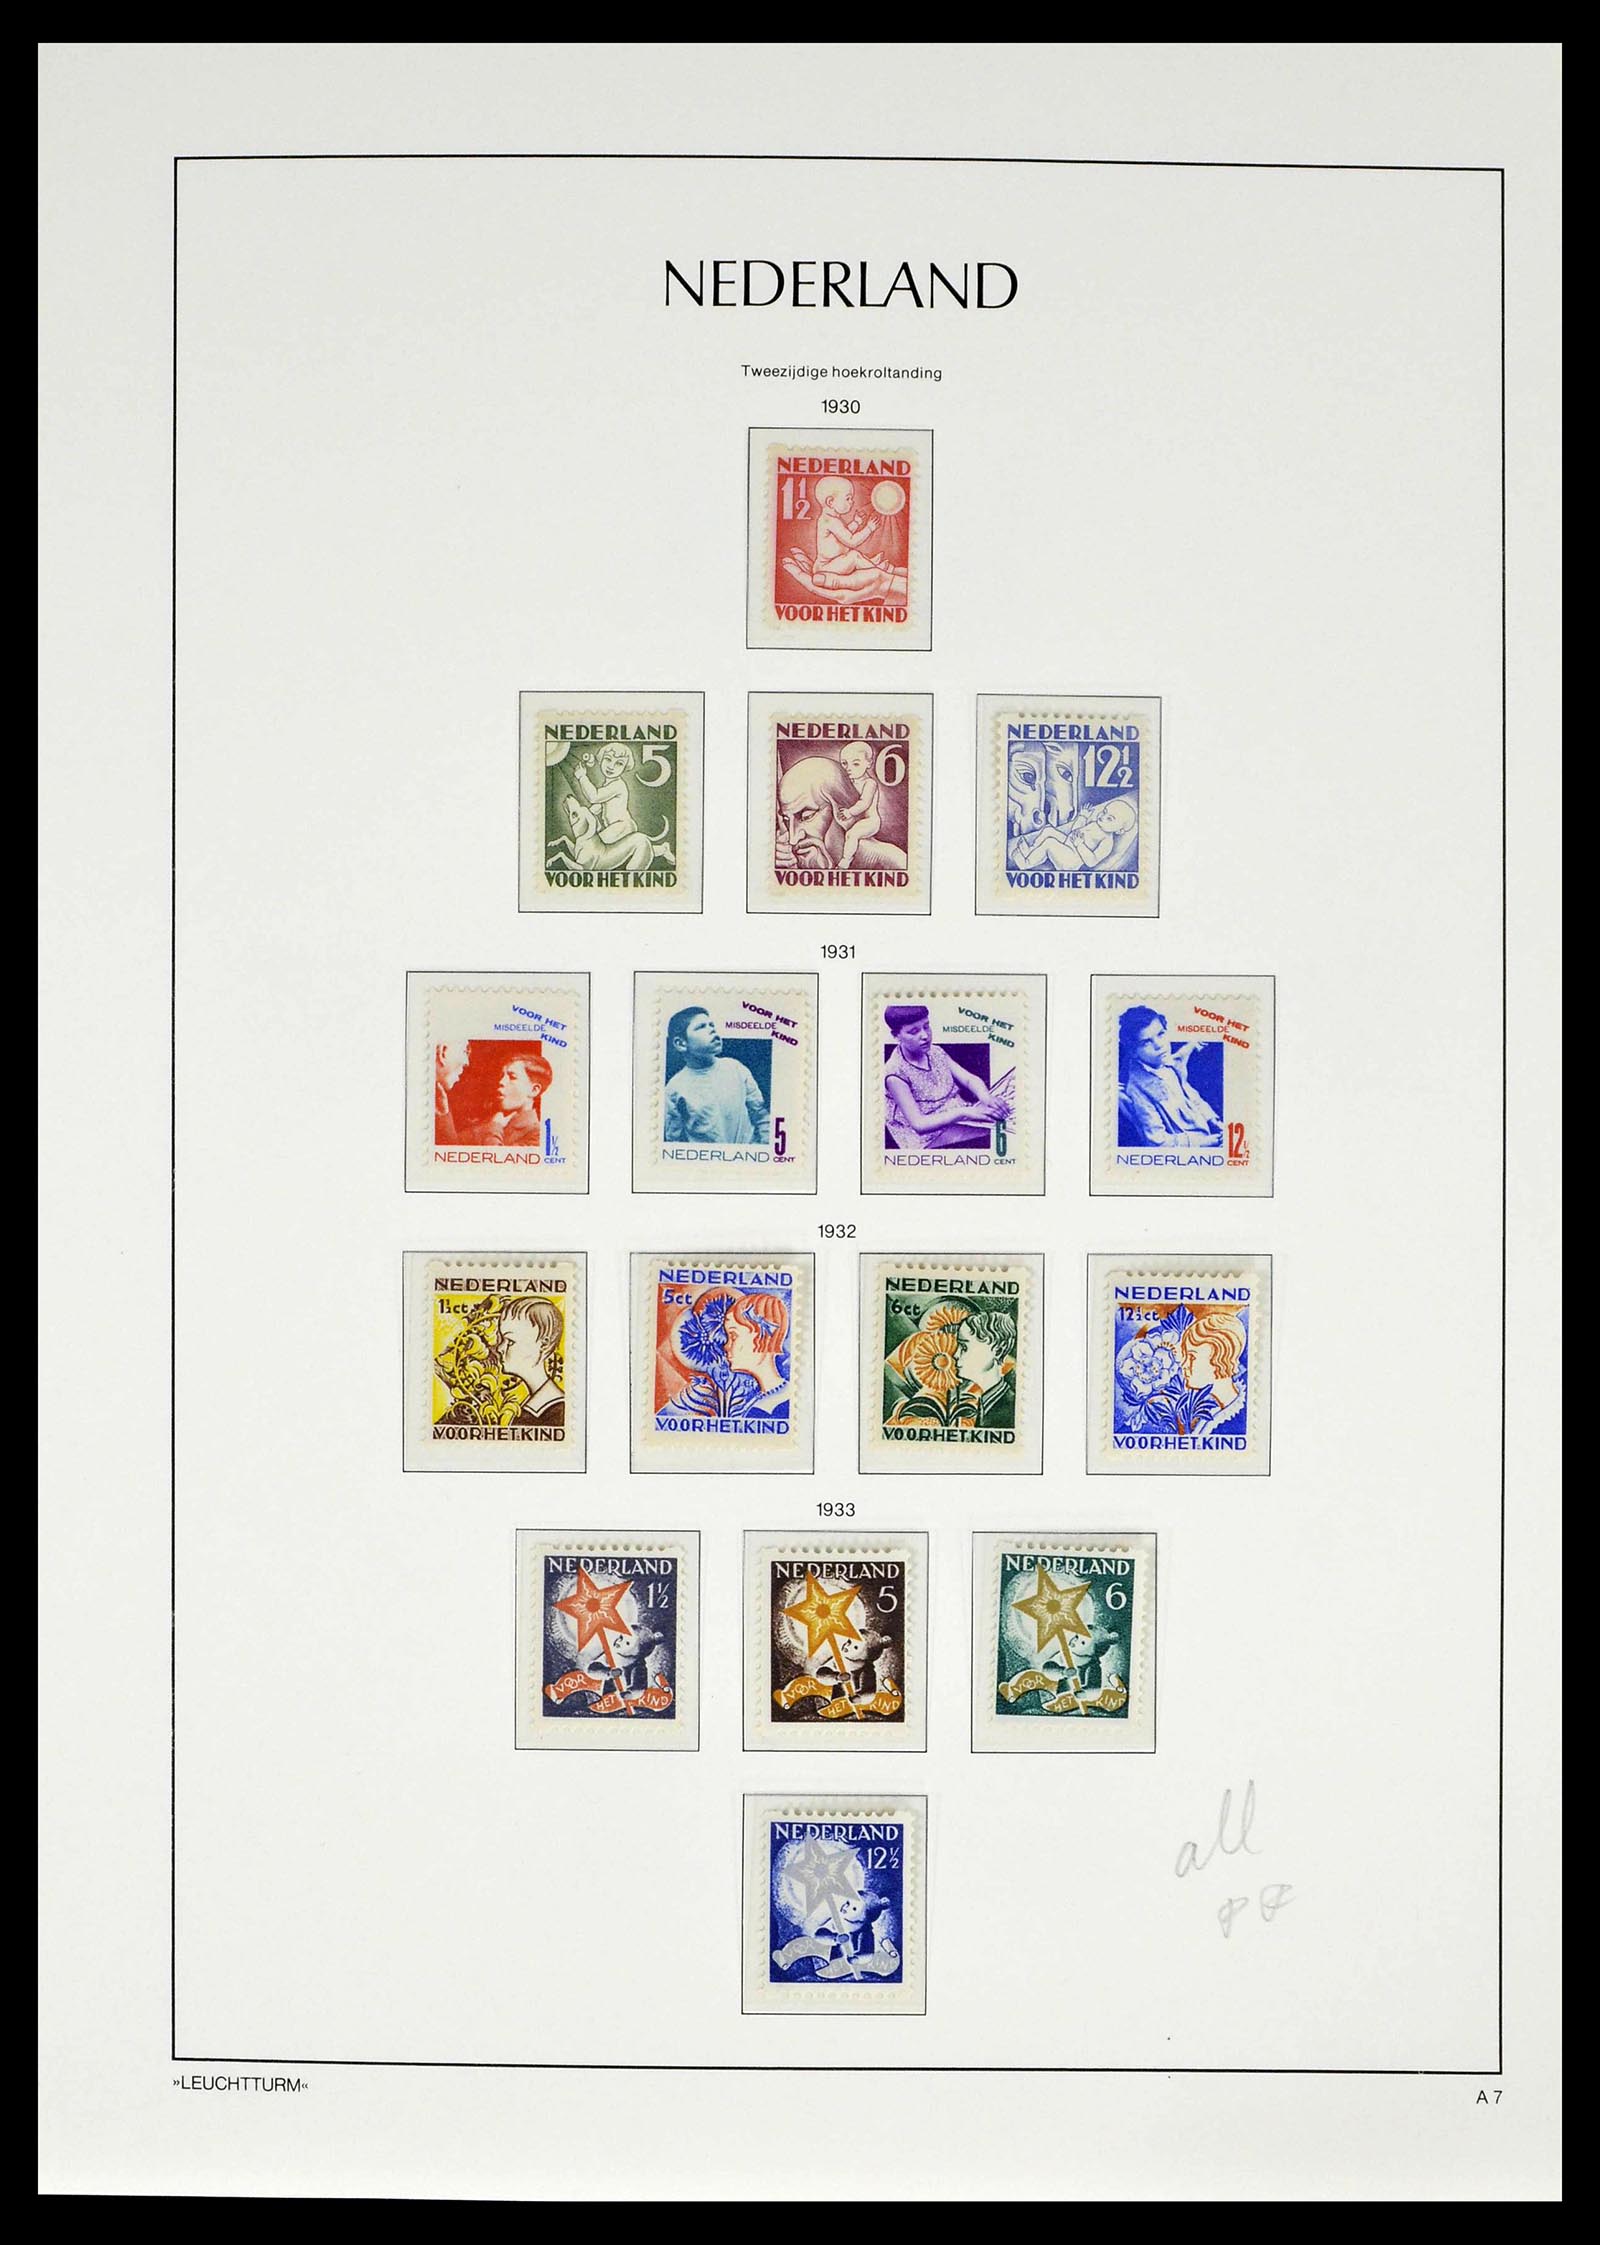 39135 0024 - Stamp collection 39135 Netherlands 1852-1969.